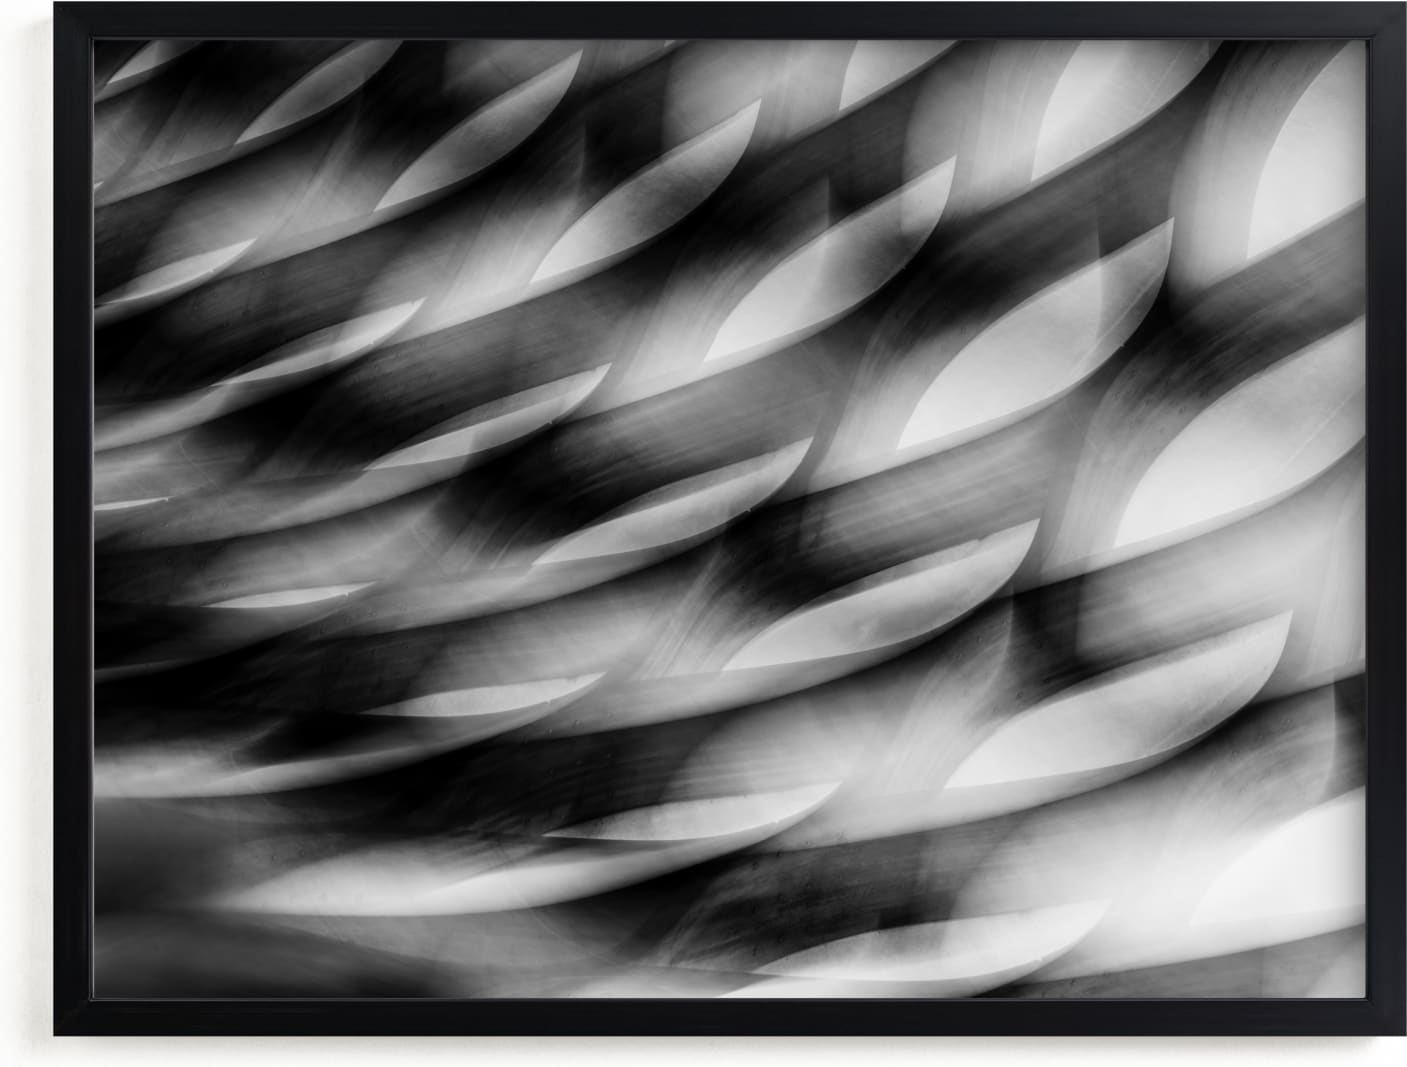 This is a black and white art by Angie McMonigal called In motion.